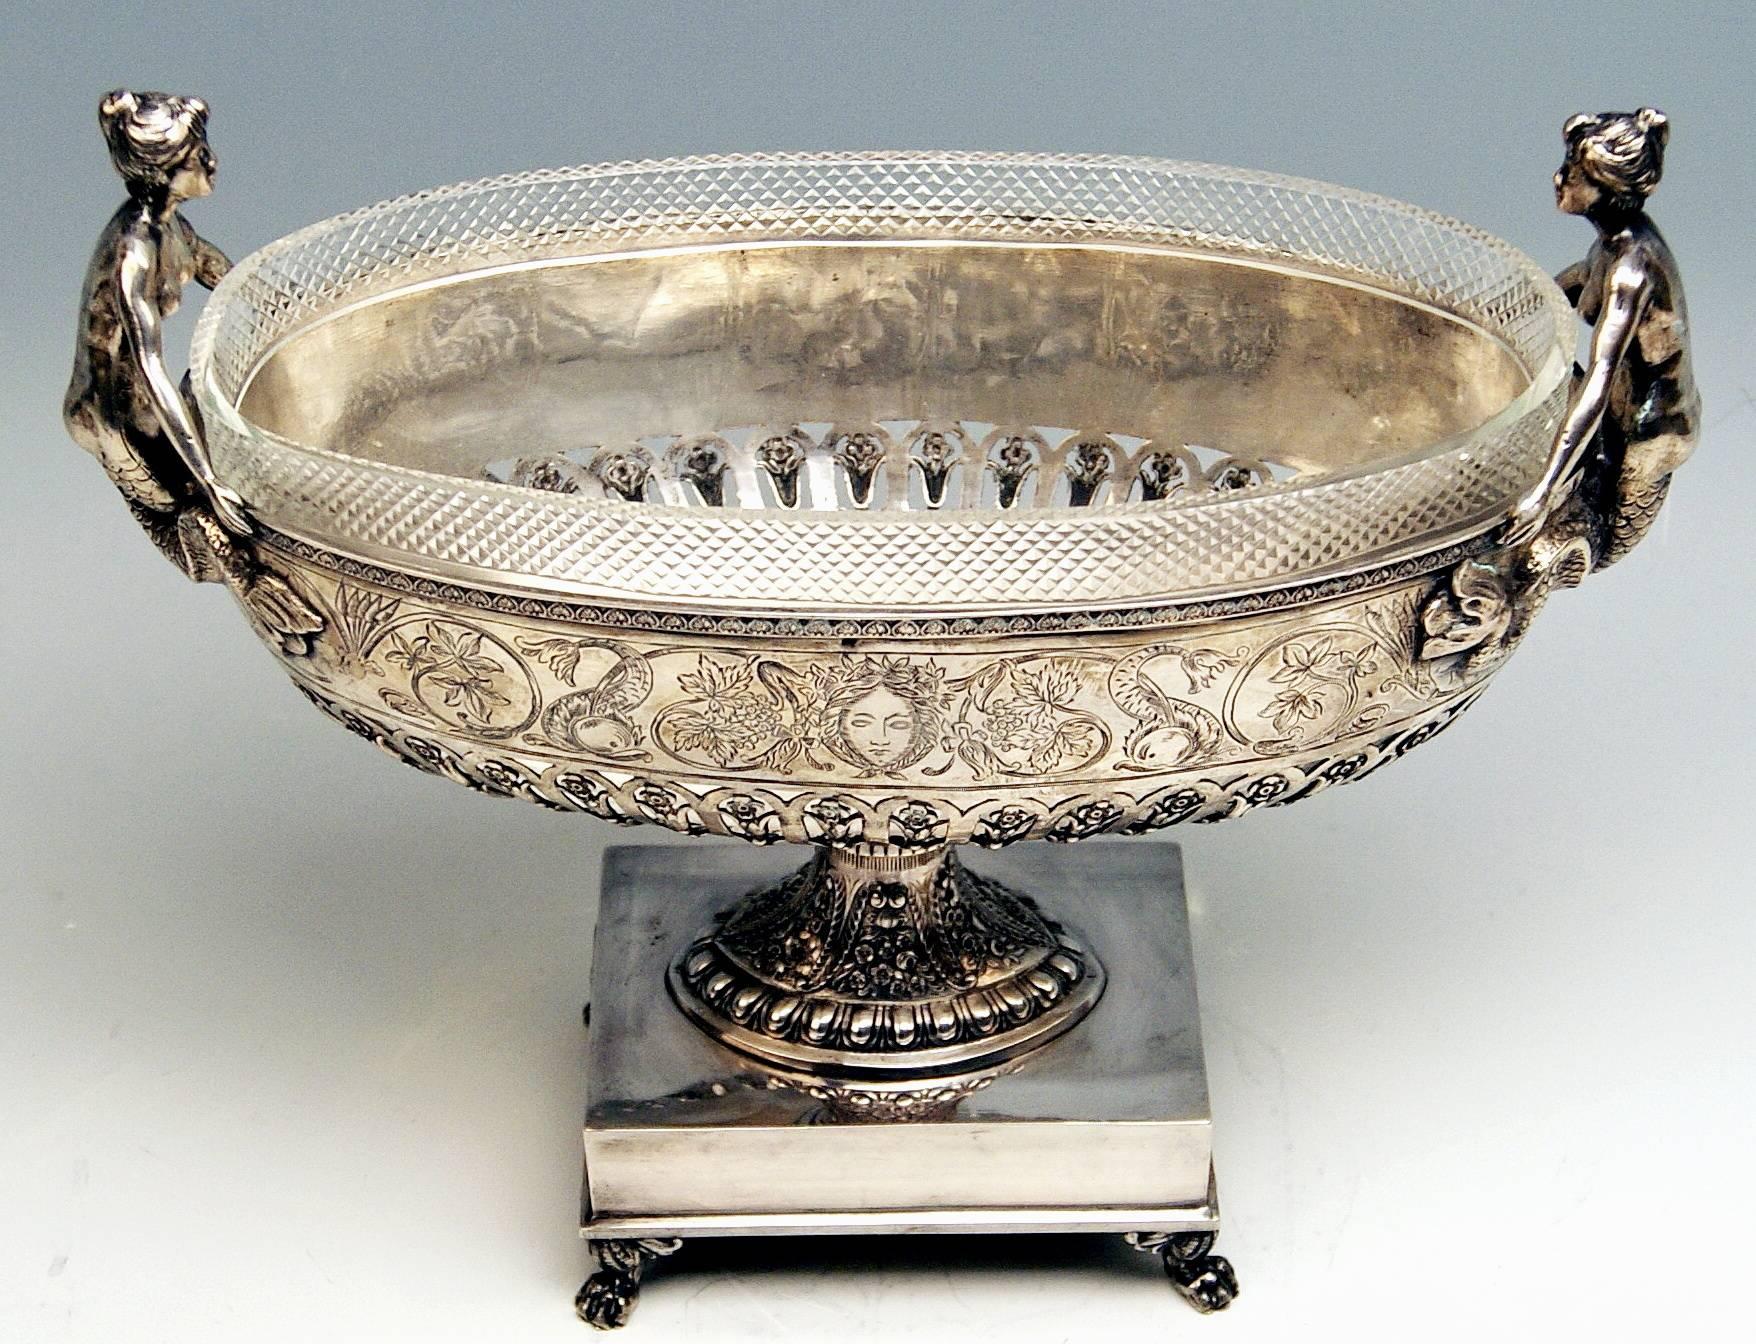 Silver 800 German Nicest flower bowl / centerpiece with original excellent glass liner

Victorian style (made circa 1900)
Silver 800
Hallmarked by Georg Roth / Hanau and Apocryphal Silver Marks:
-- Georg Roth Company / Hanauer